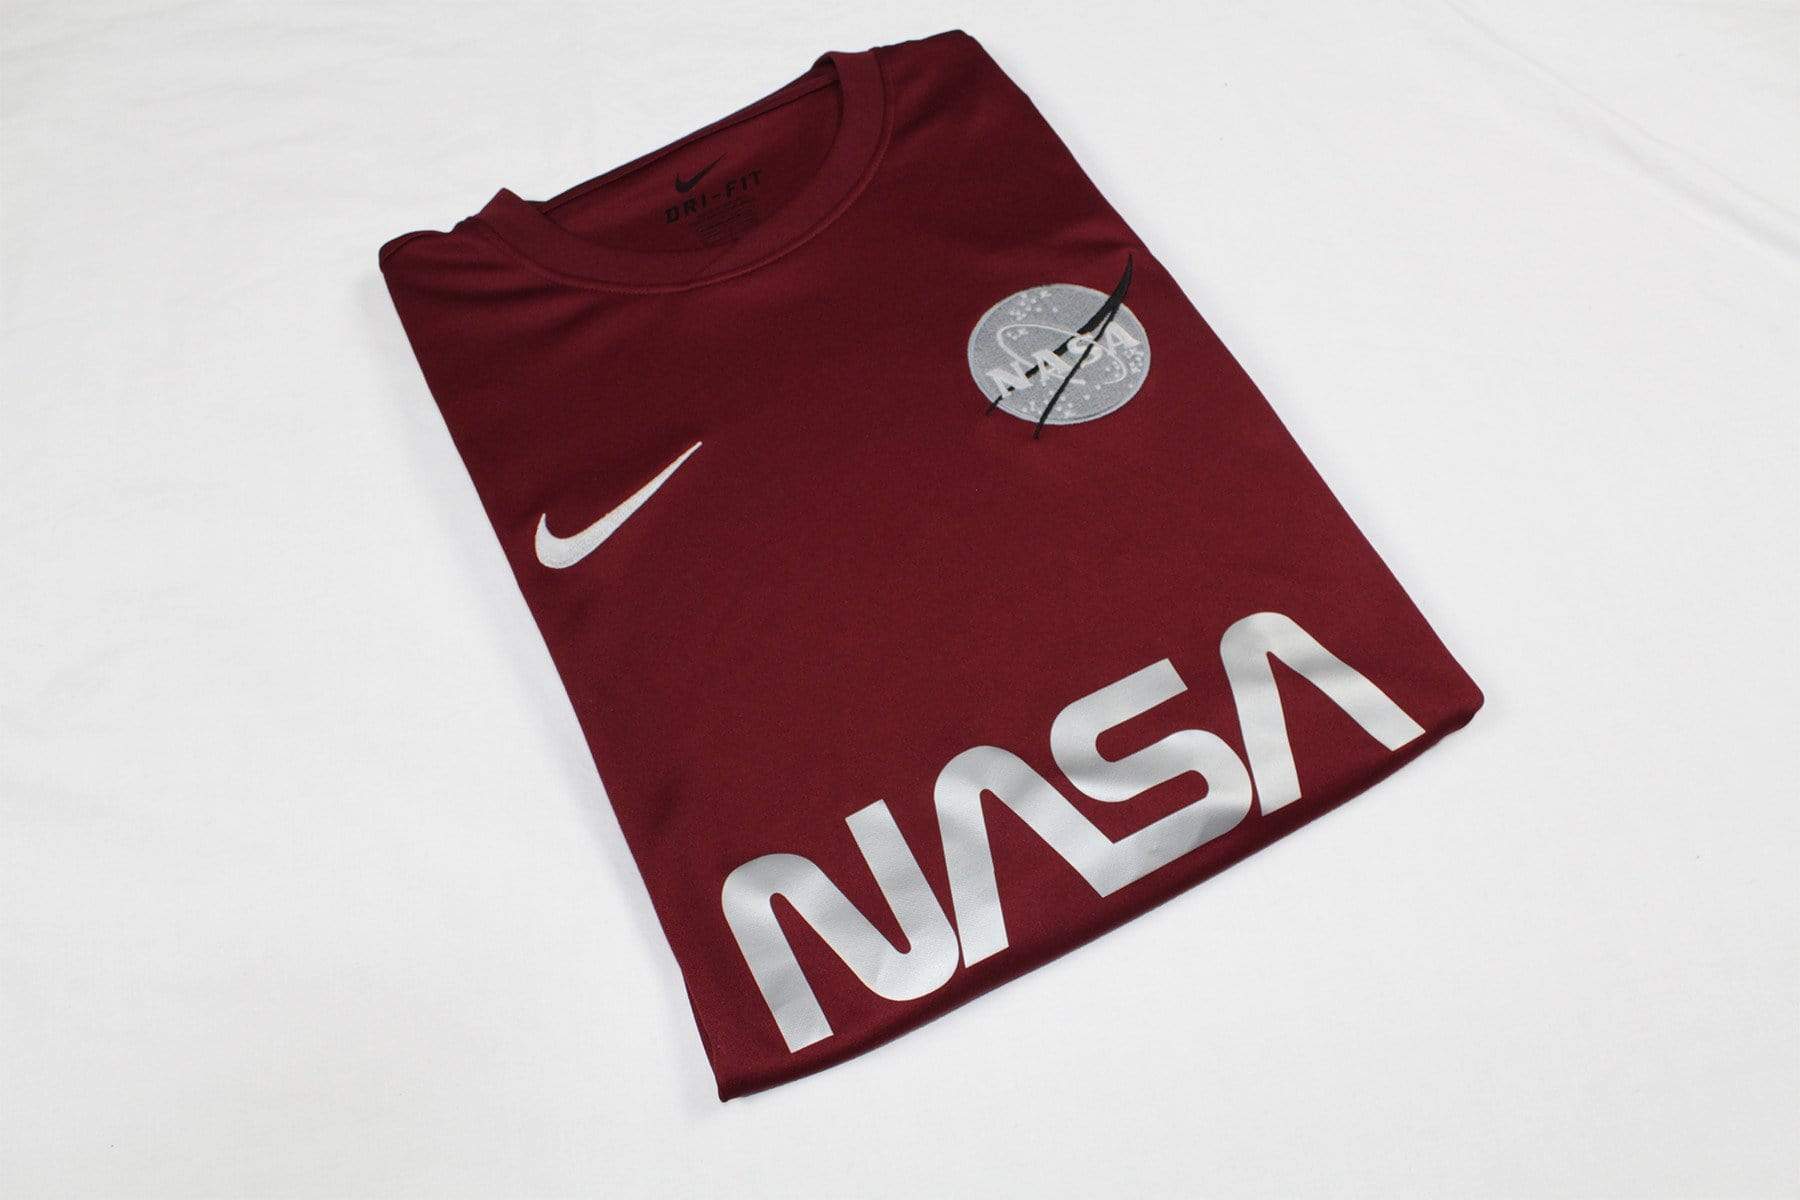 TheConceptClub Nasa Red Planet Jersey (Red)